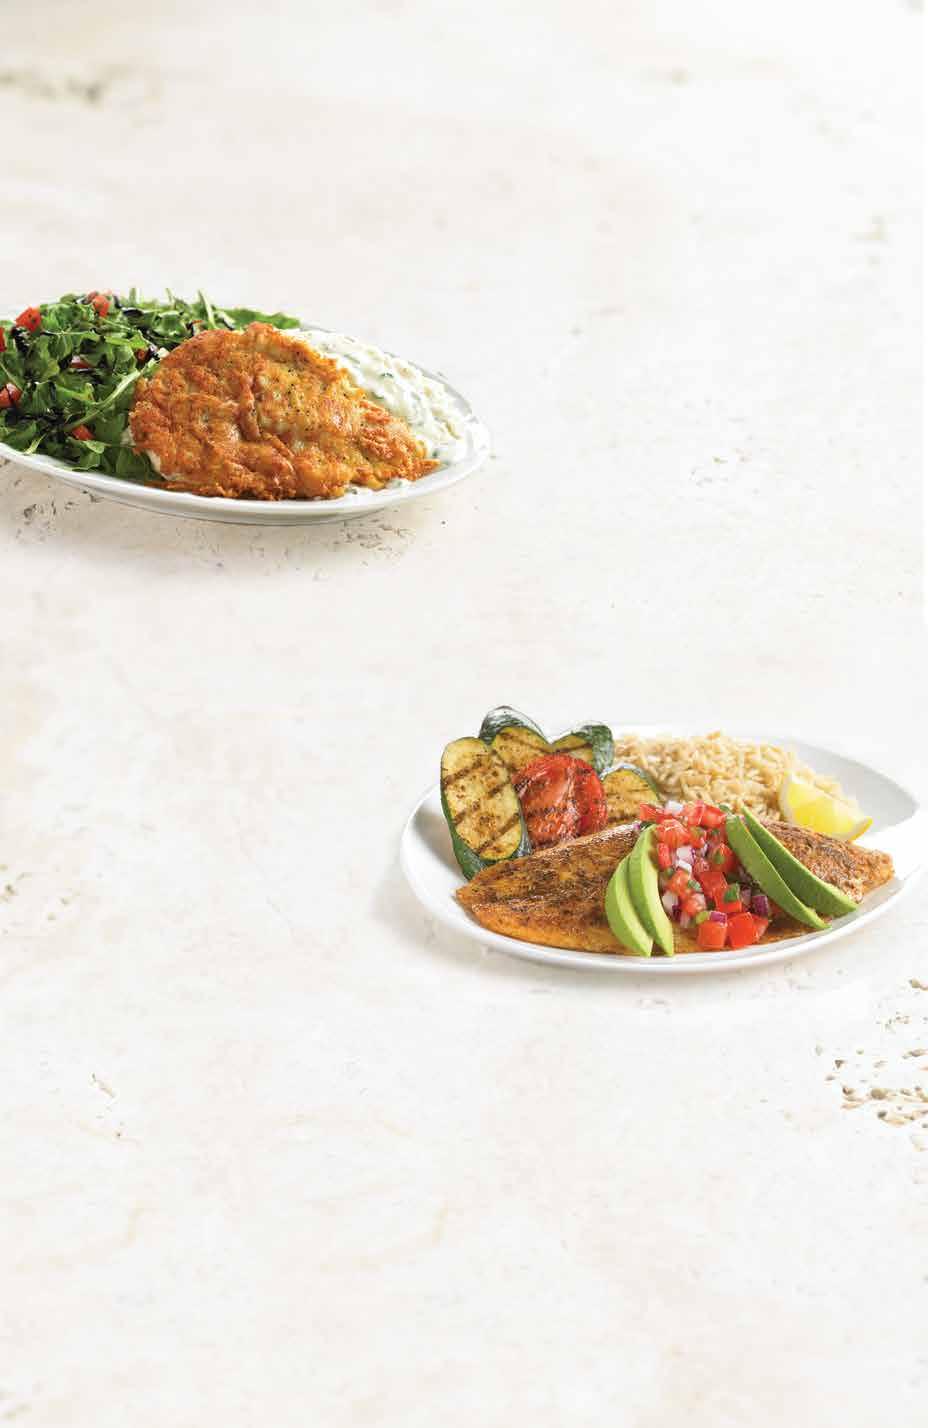 Signature It s the Delicious recipes made with the freshest ingredients and spices. Add a Fresh Garden Salad or Cup of Coco s Signature Soup to any entrée for $2.49 SEAFOOD way!